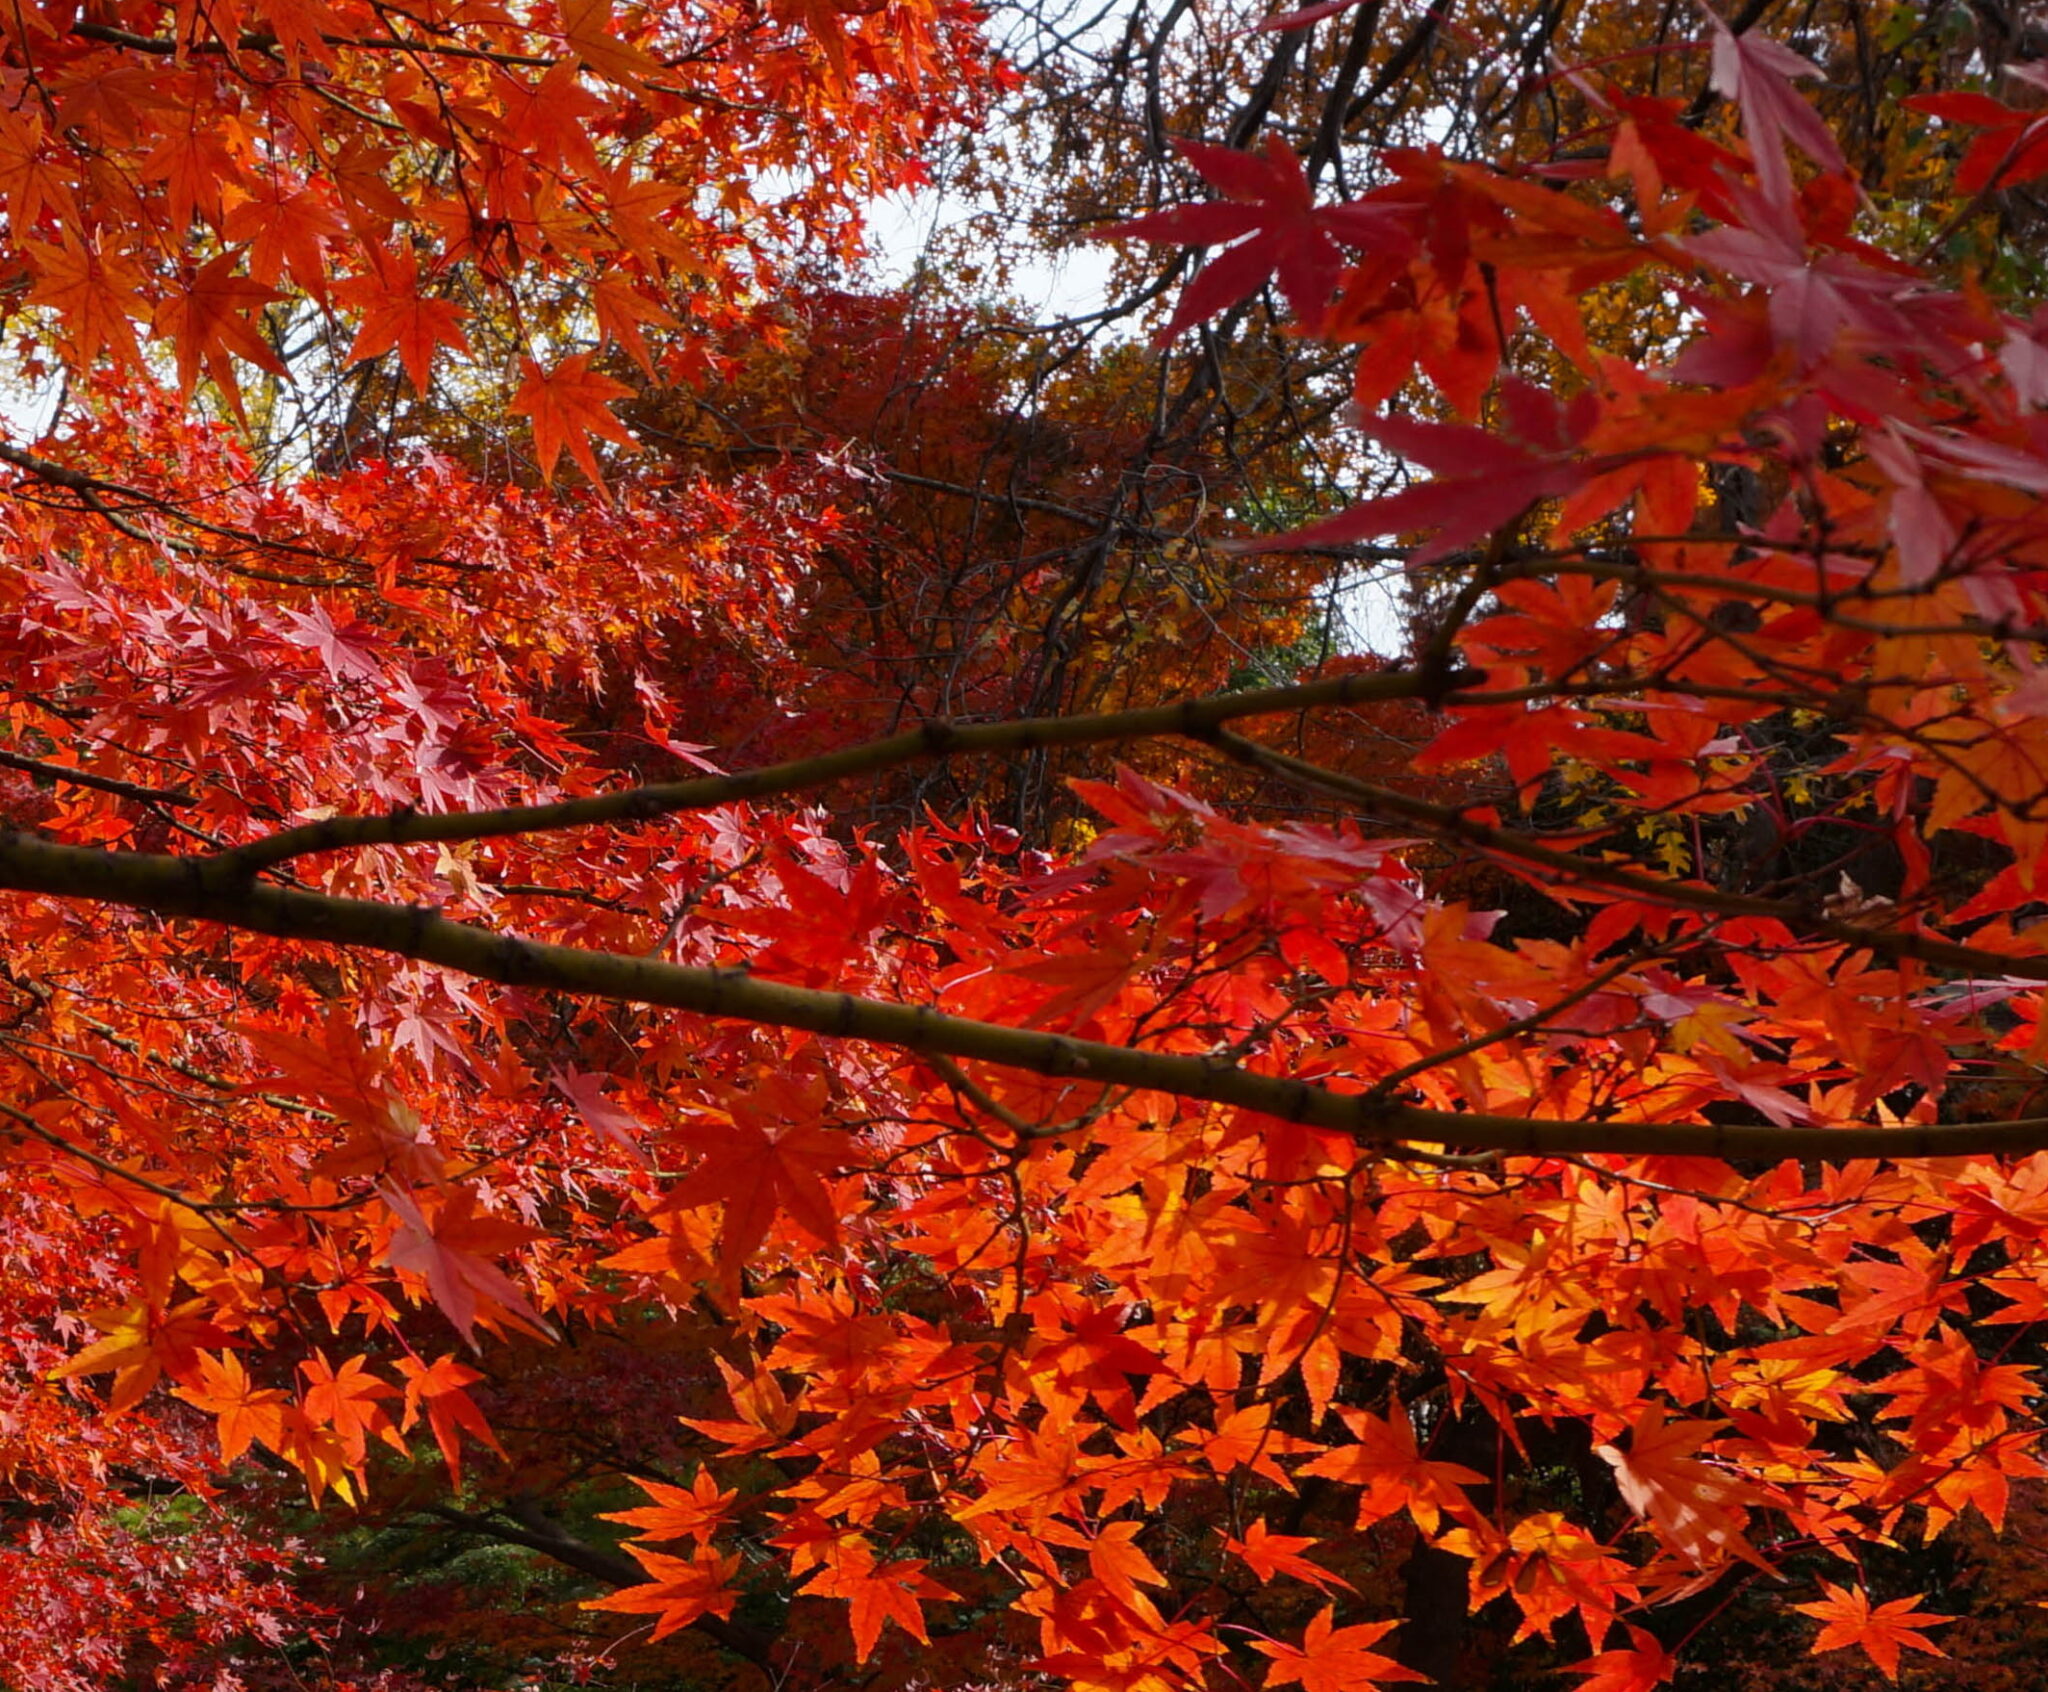 Red Maple trees in the Japanese Garden